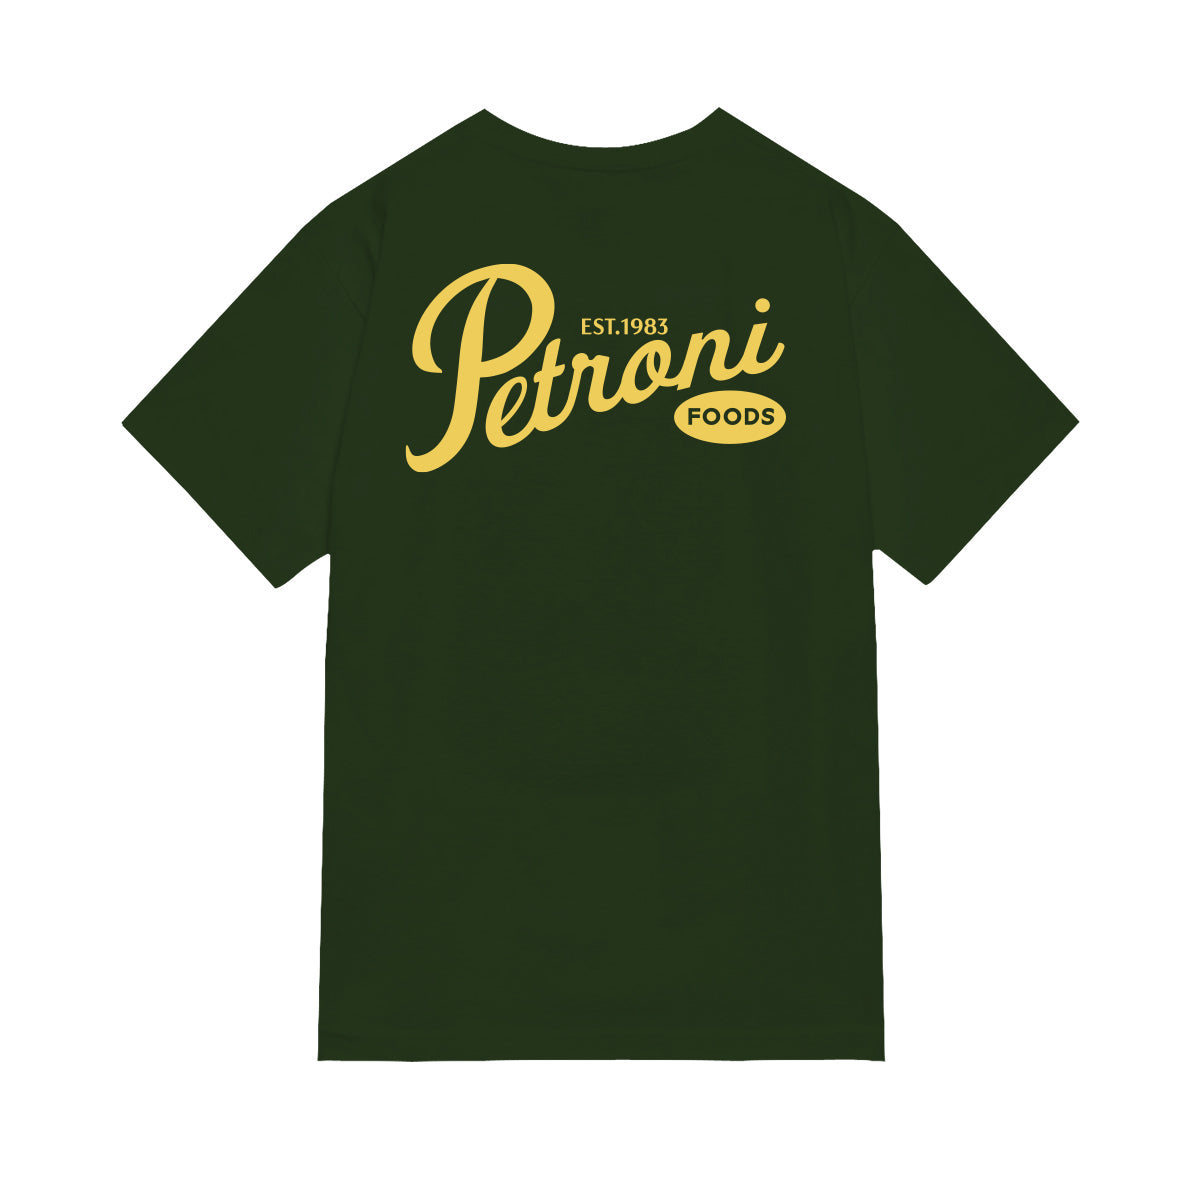 Petroni Foods T-Shirt - Forest Green